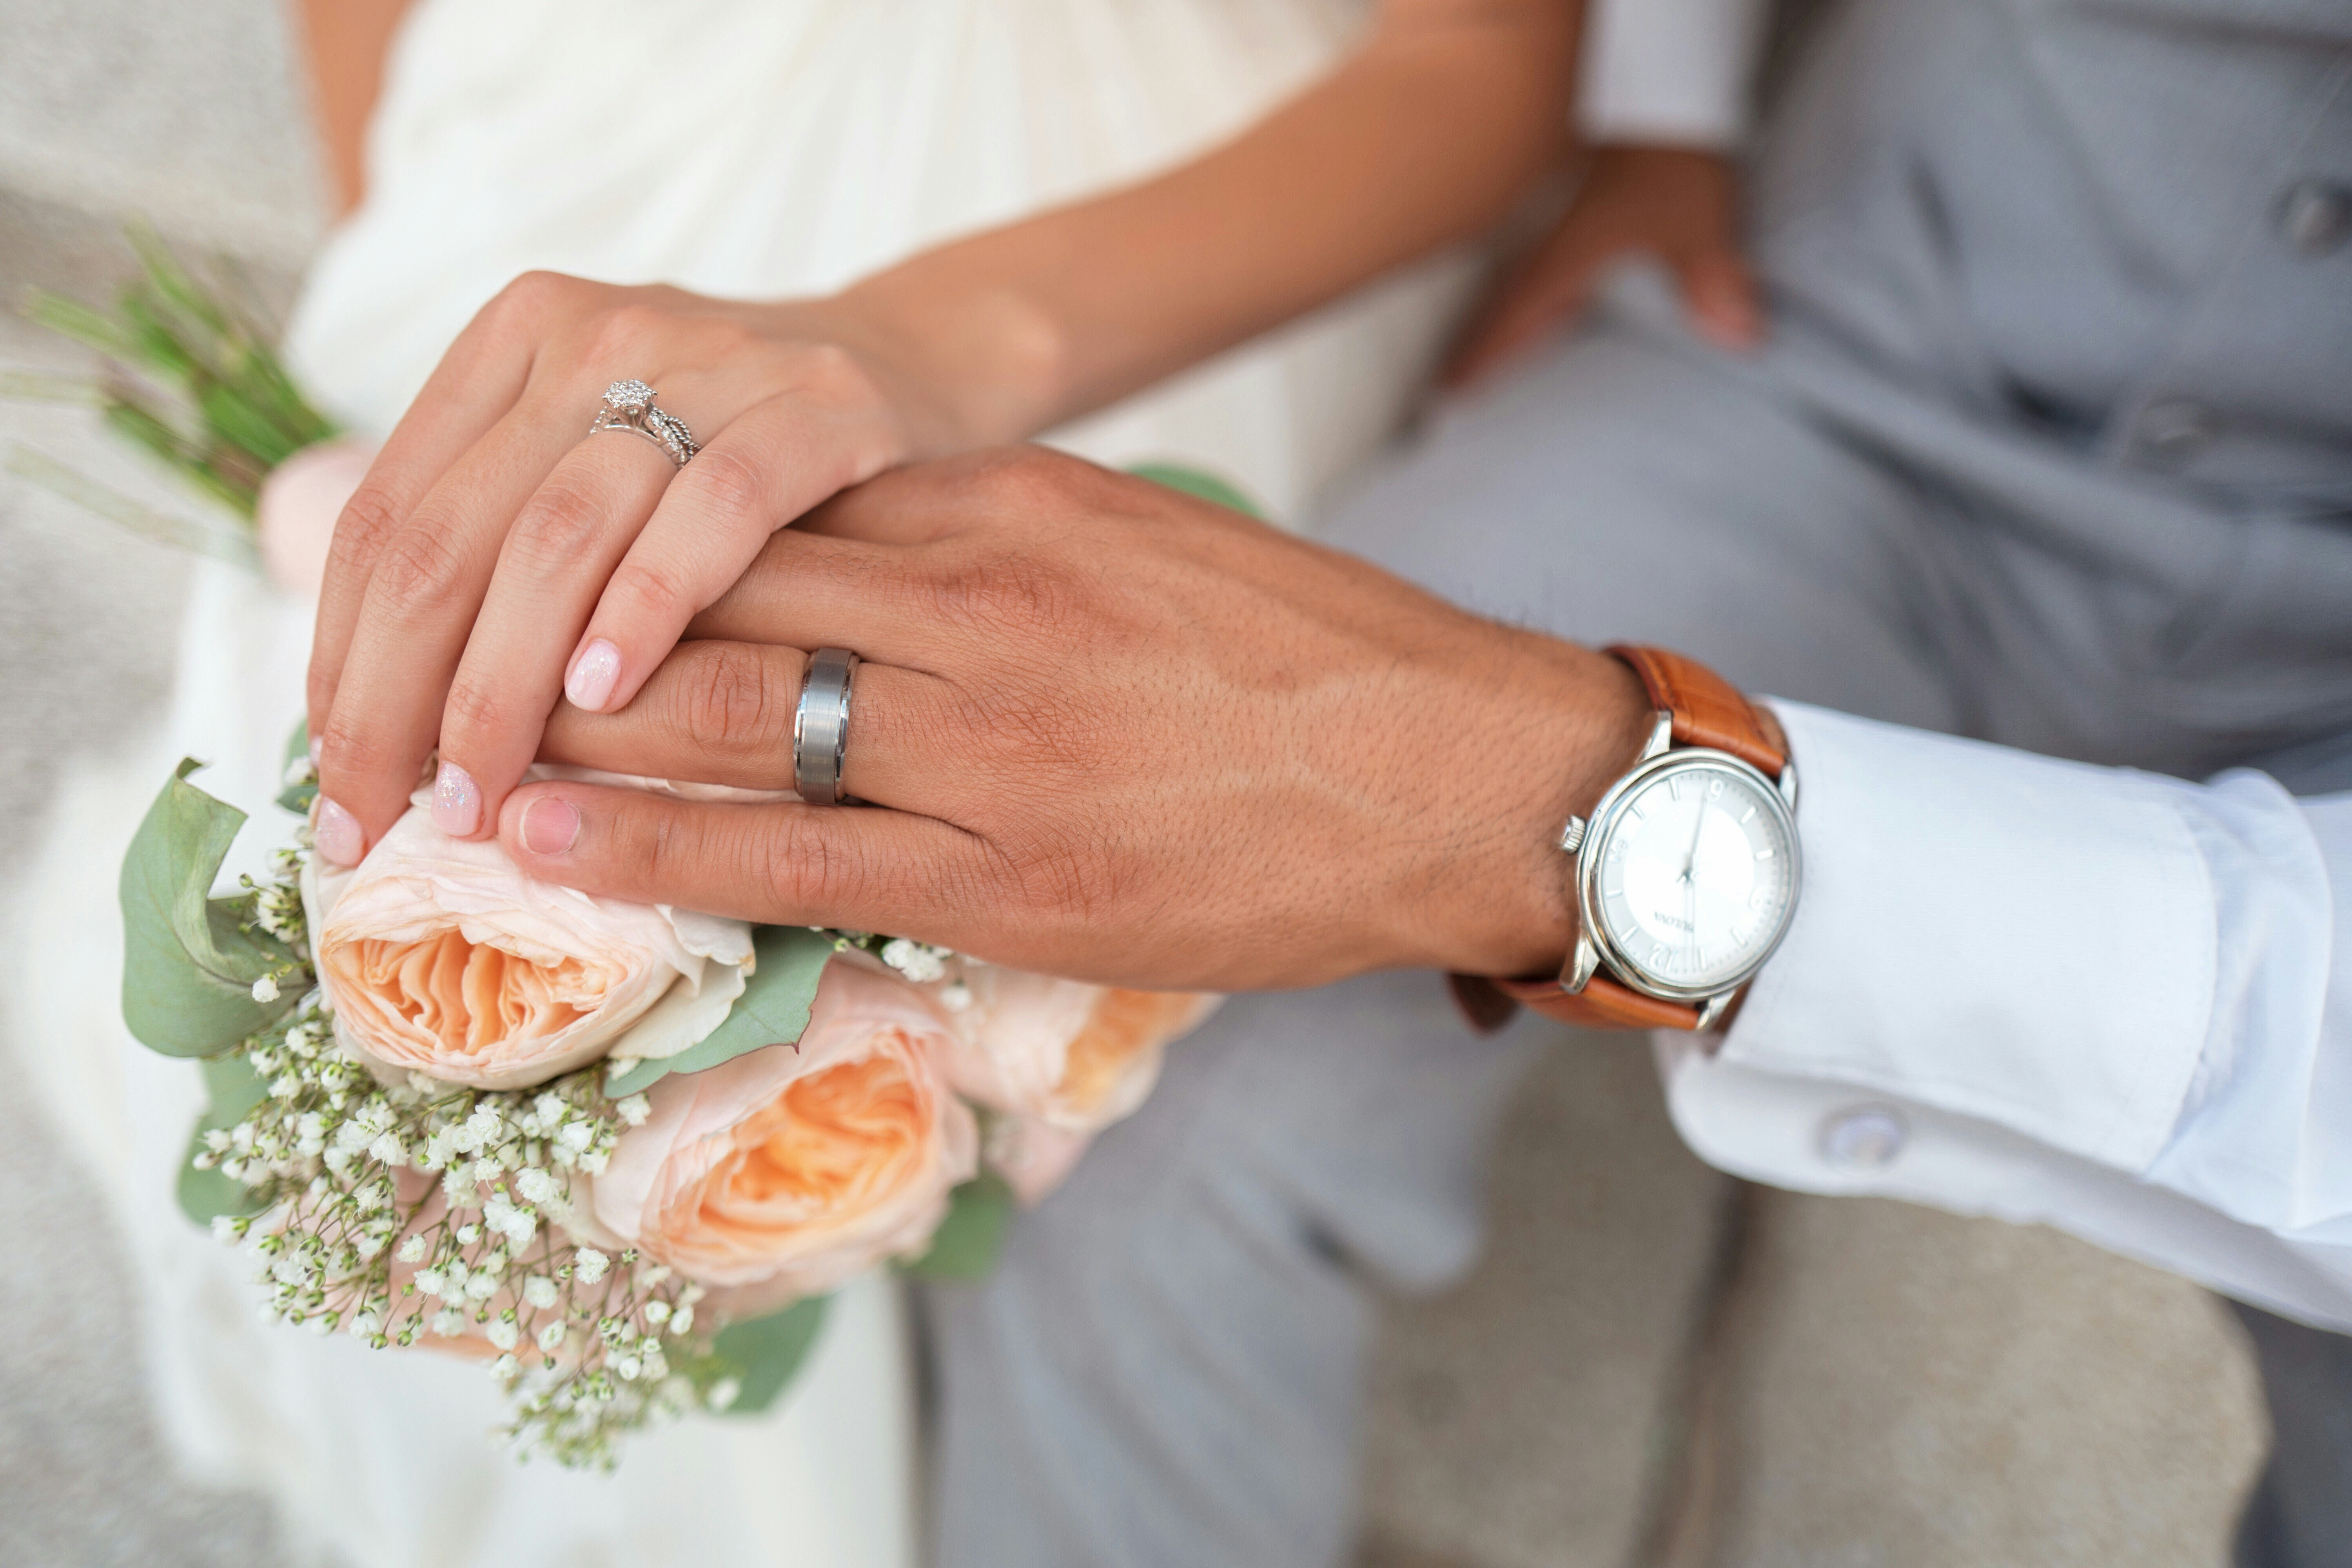 A couple showing wedding rings | Source: Unsplash